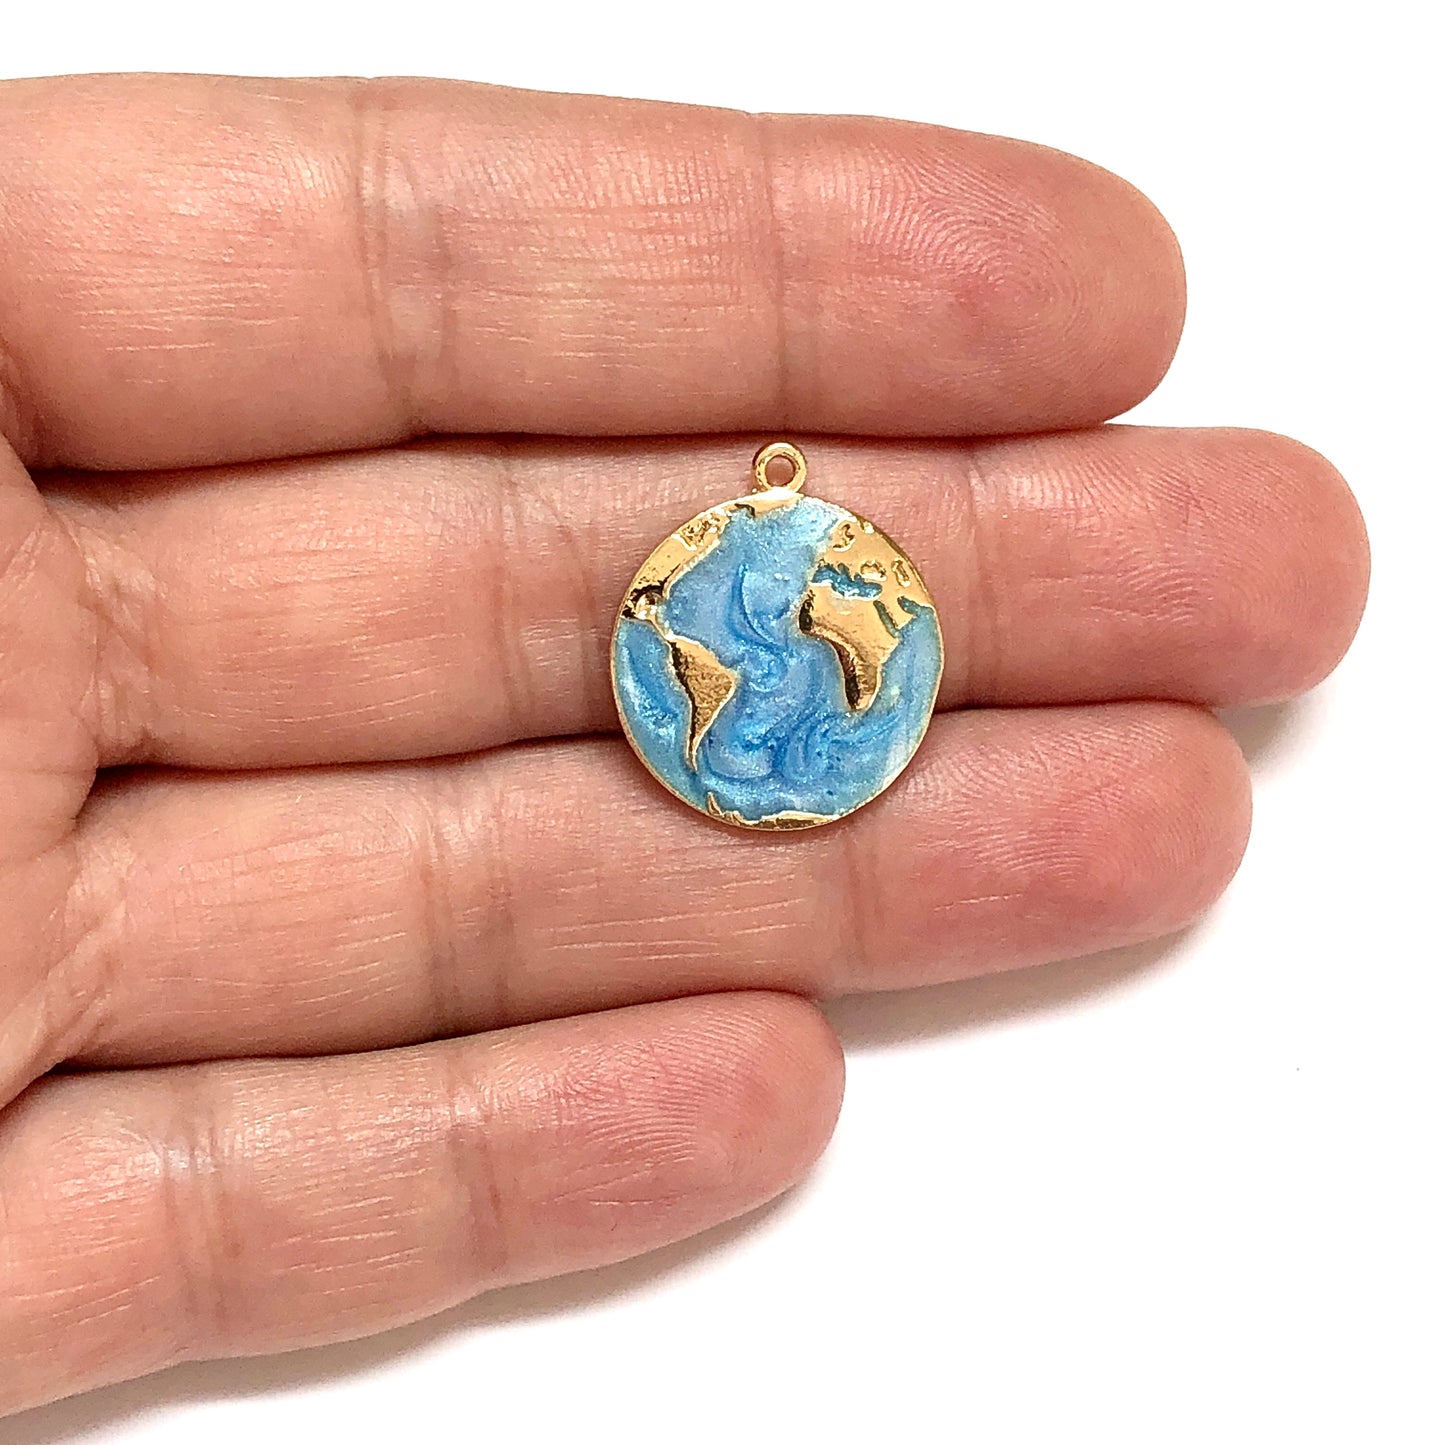 Gold Plated Enameled Earth Pendant - Parliament